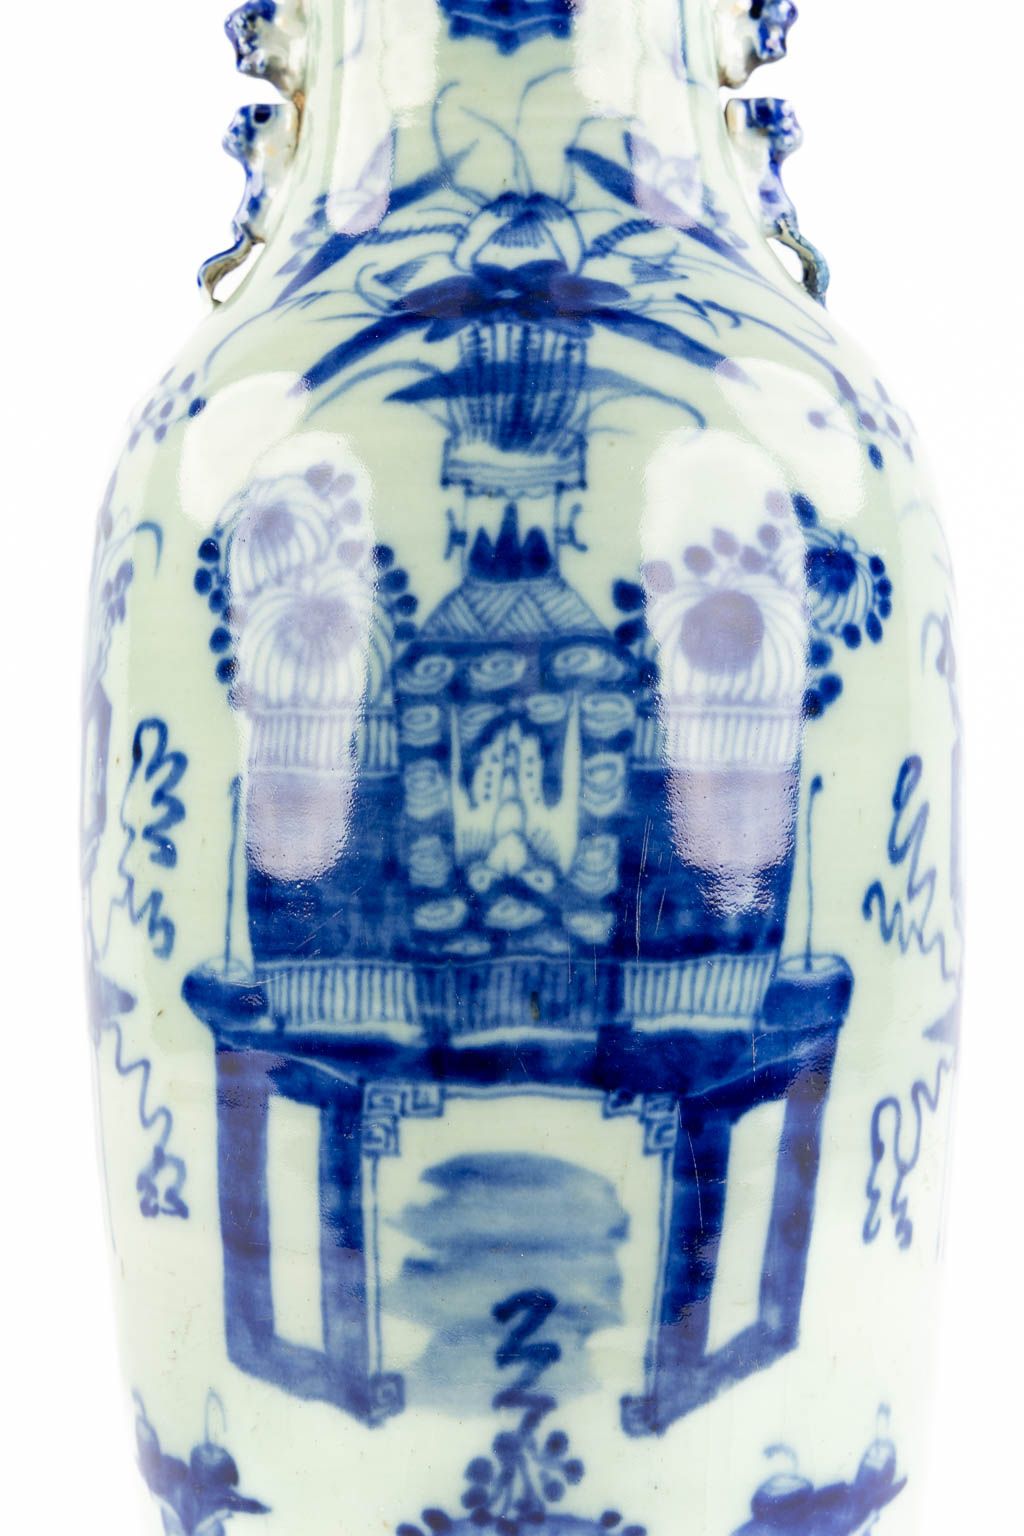 A Chinese celadon vase, decorated with flowers. 19th C. (H:56 x D:22 cm) - Image 12 of 12